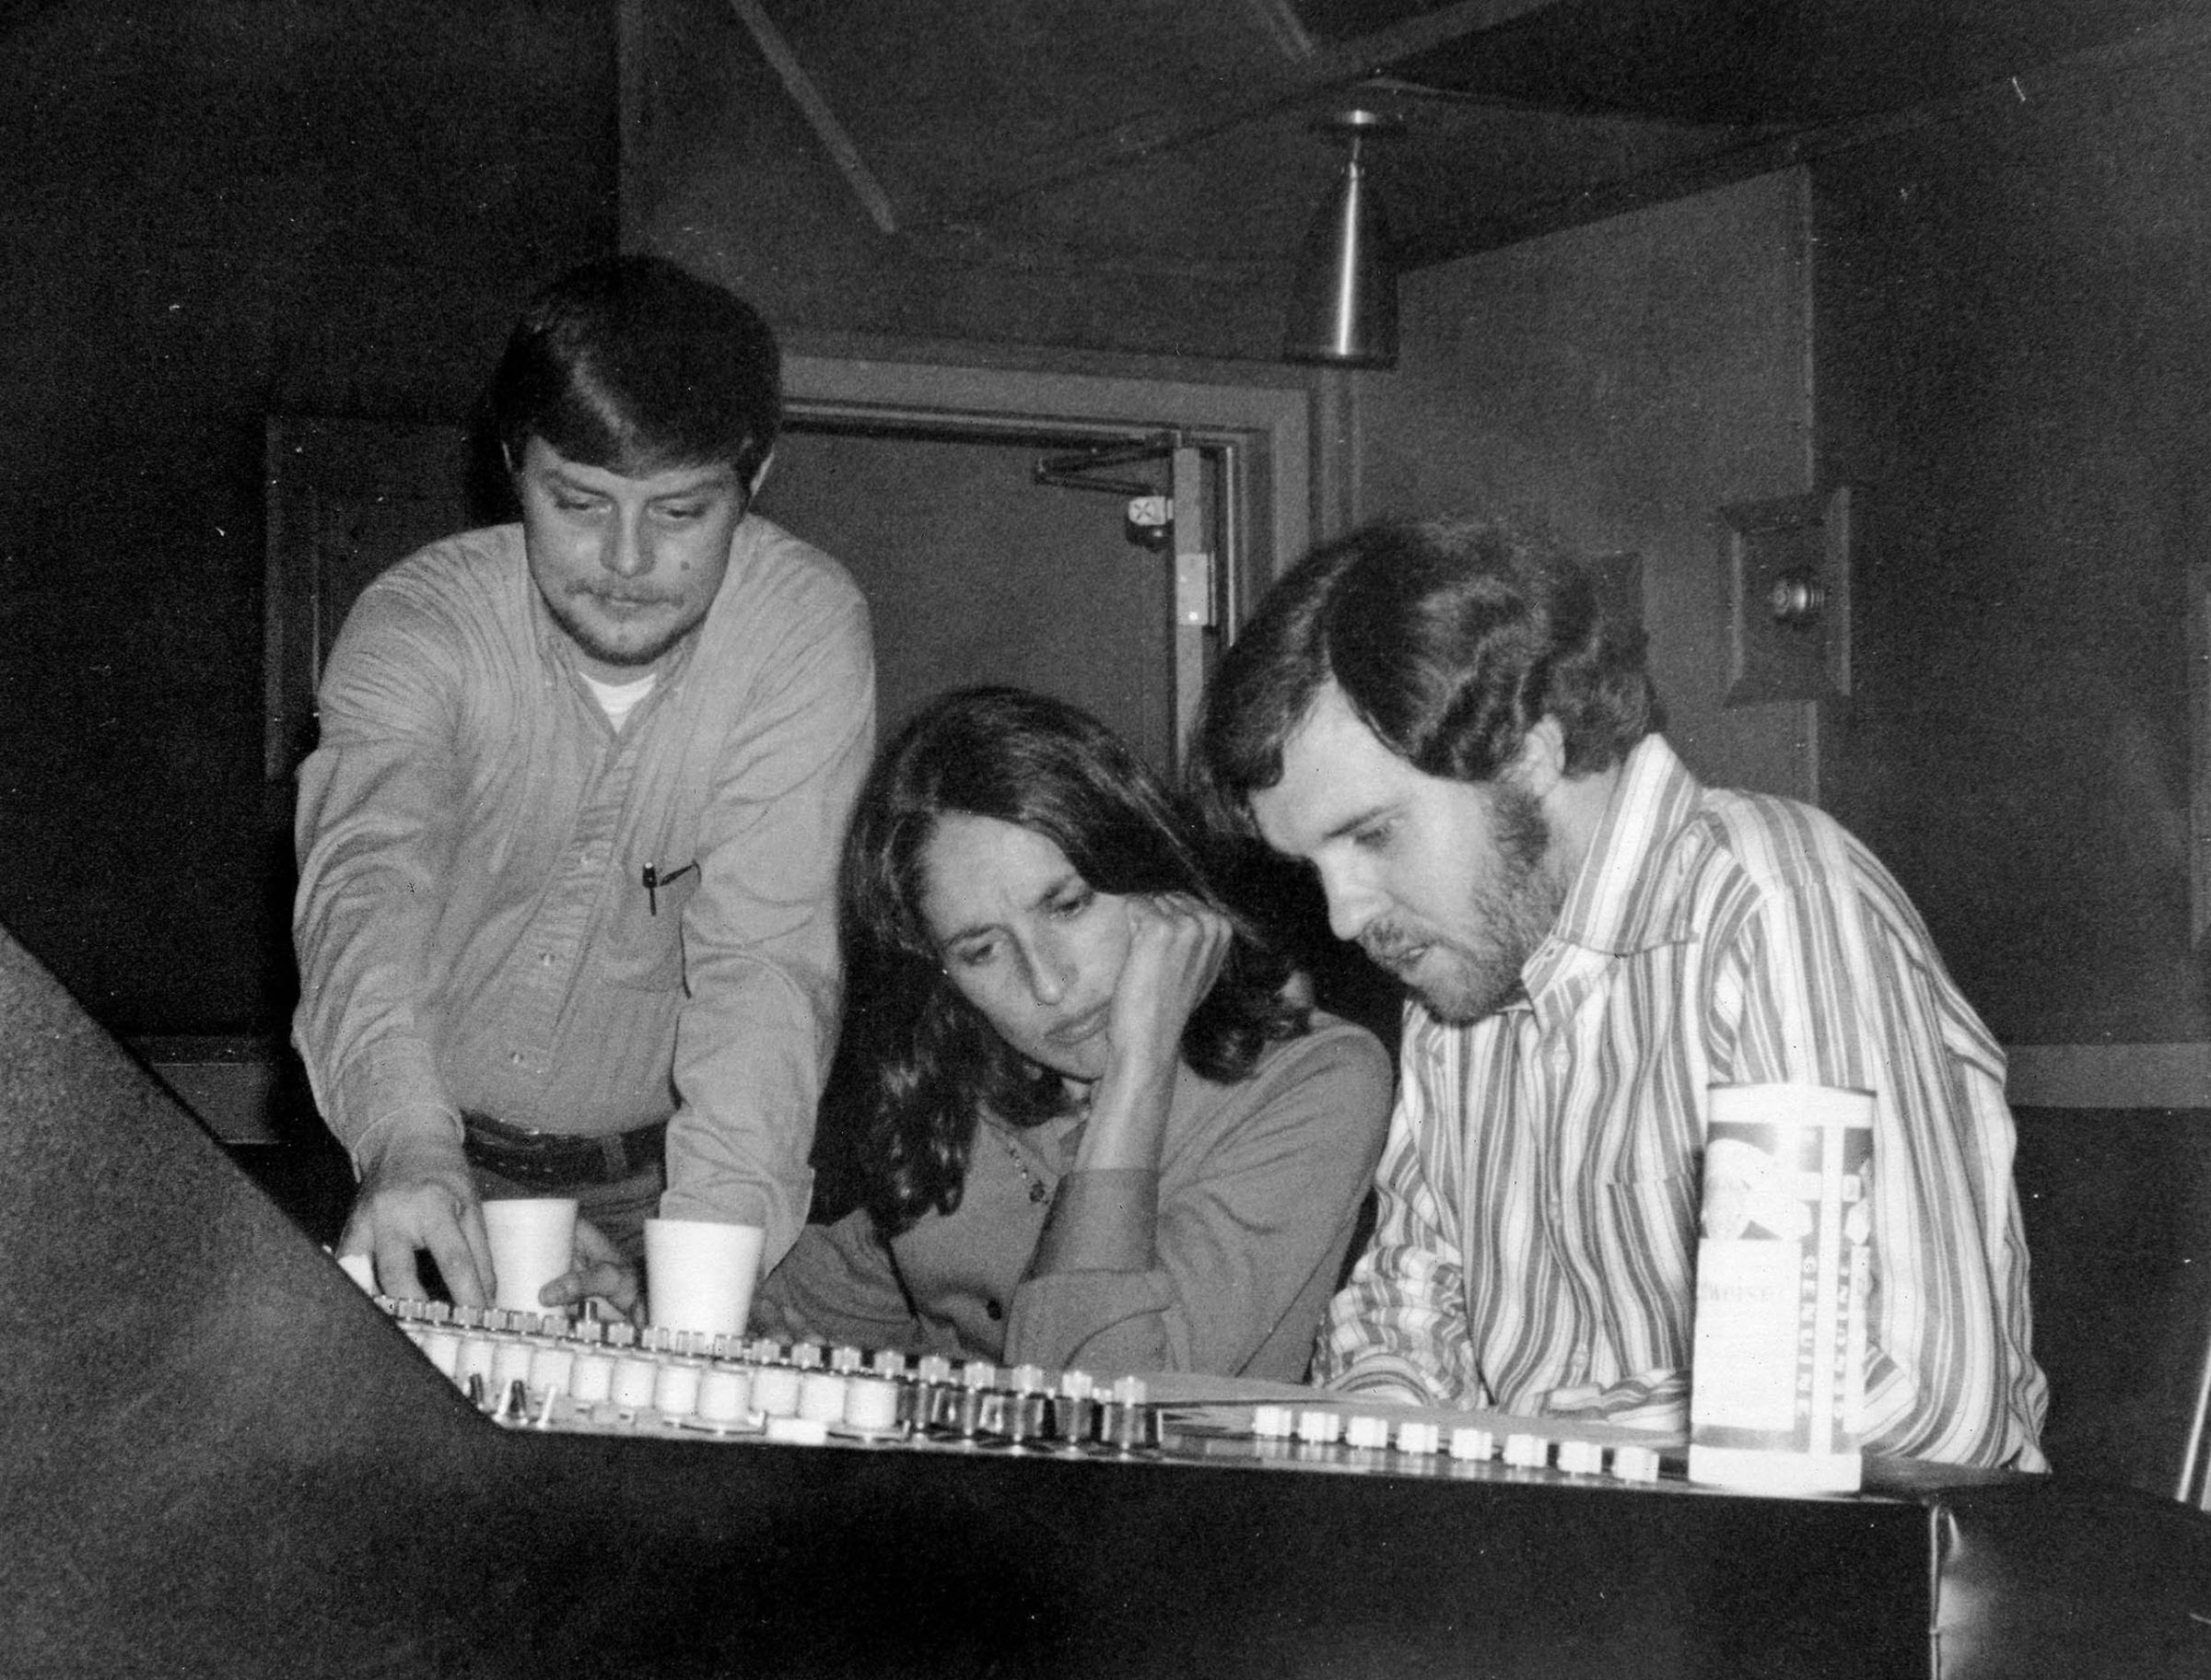 Pictured recording at Woodland Studios in the 1970s are (l-r): Ernie Winfrey (standing), Joan Baez, and Norbert Putnam. Photo courtesy of Ernie Winfrey and the Country Music Hall of Fame and Museum.